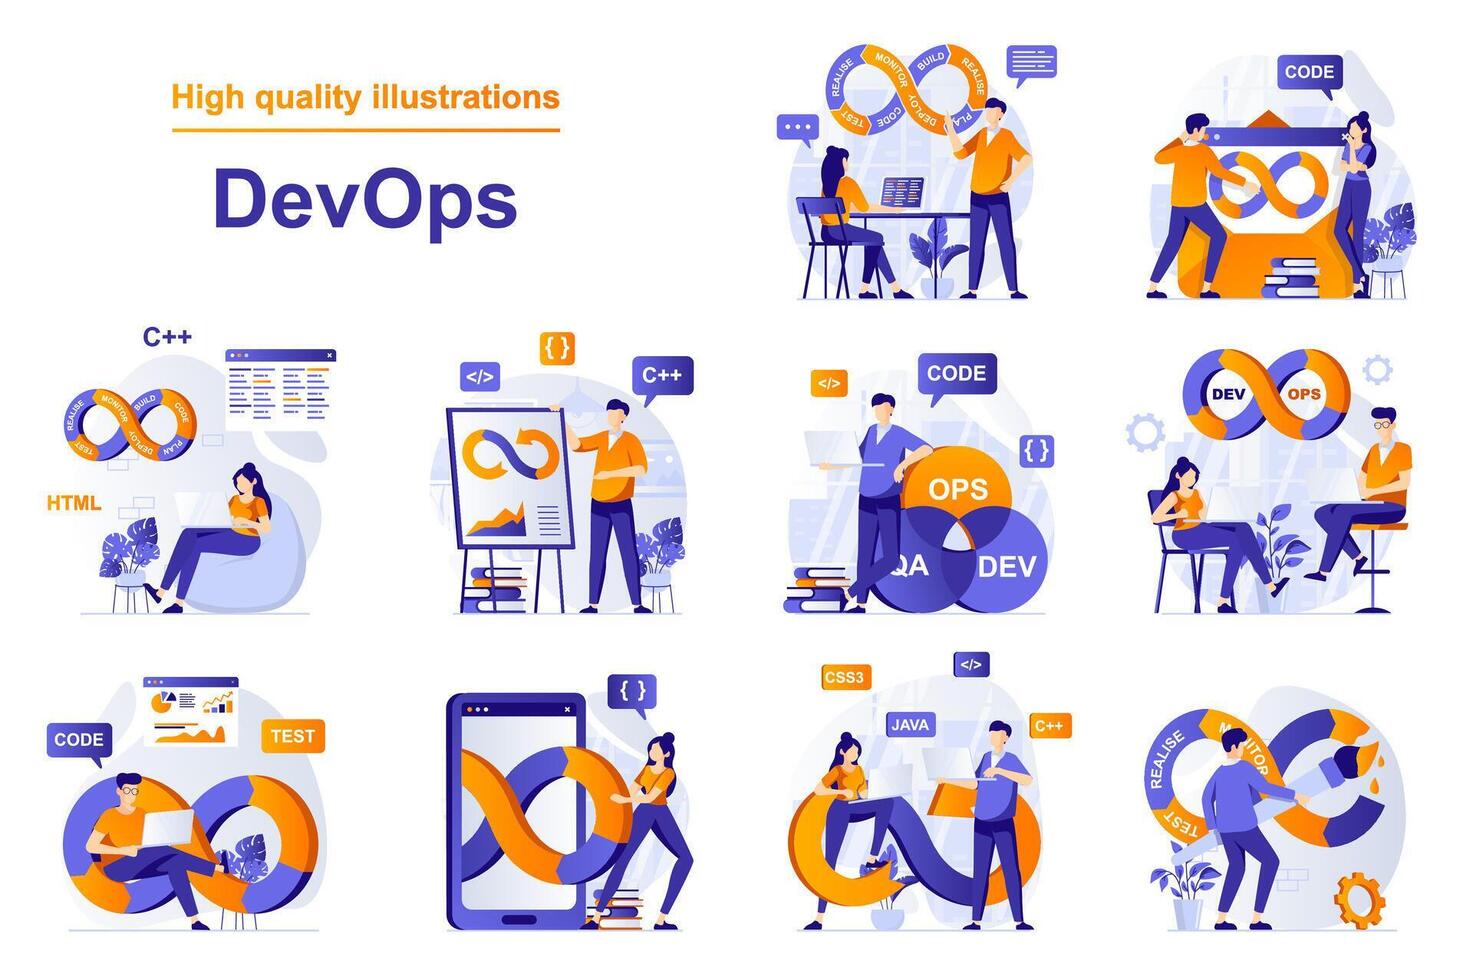 DevOps web concept with people scenes set in flat style. Bundle of programmers interact with tech support engineers, administration development operations. illustration with character design vector